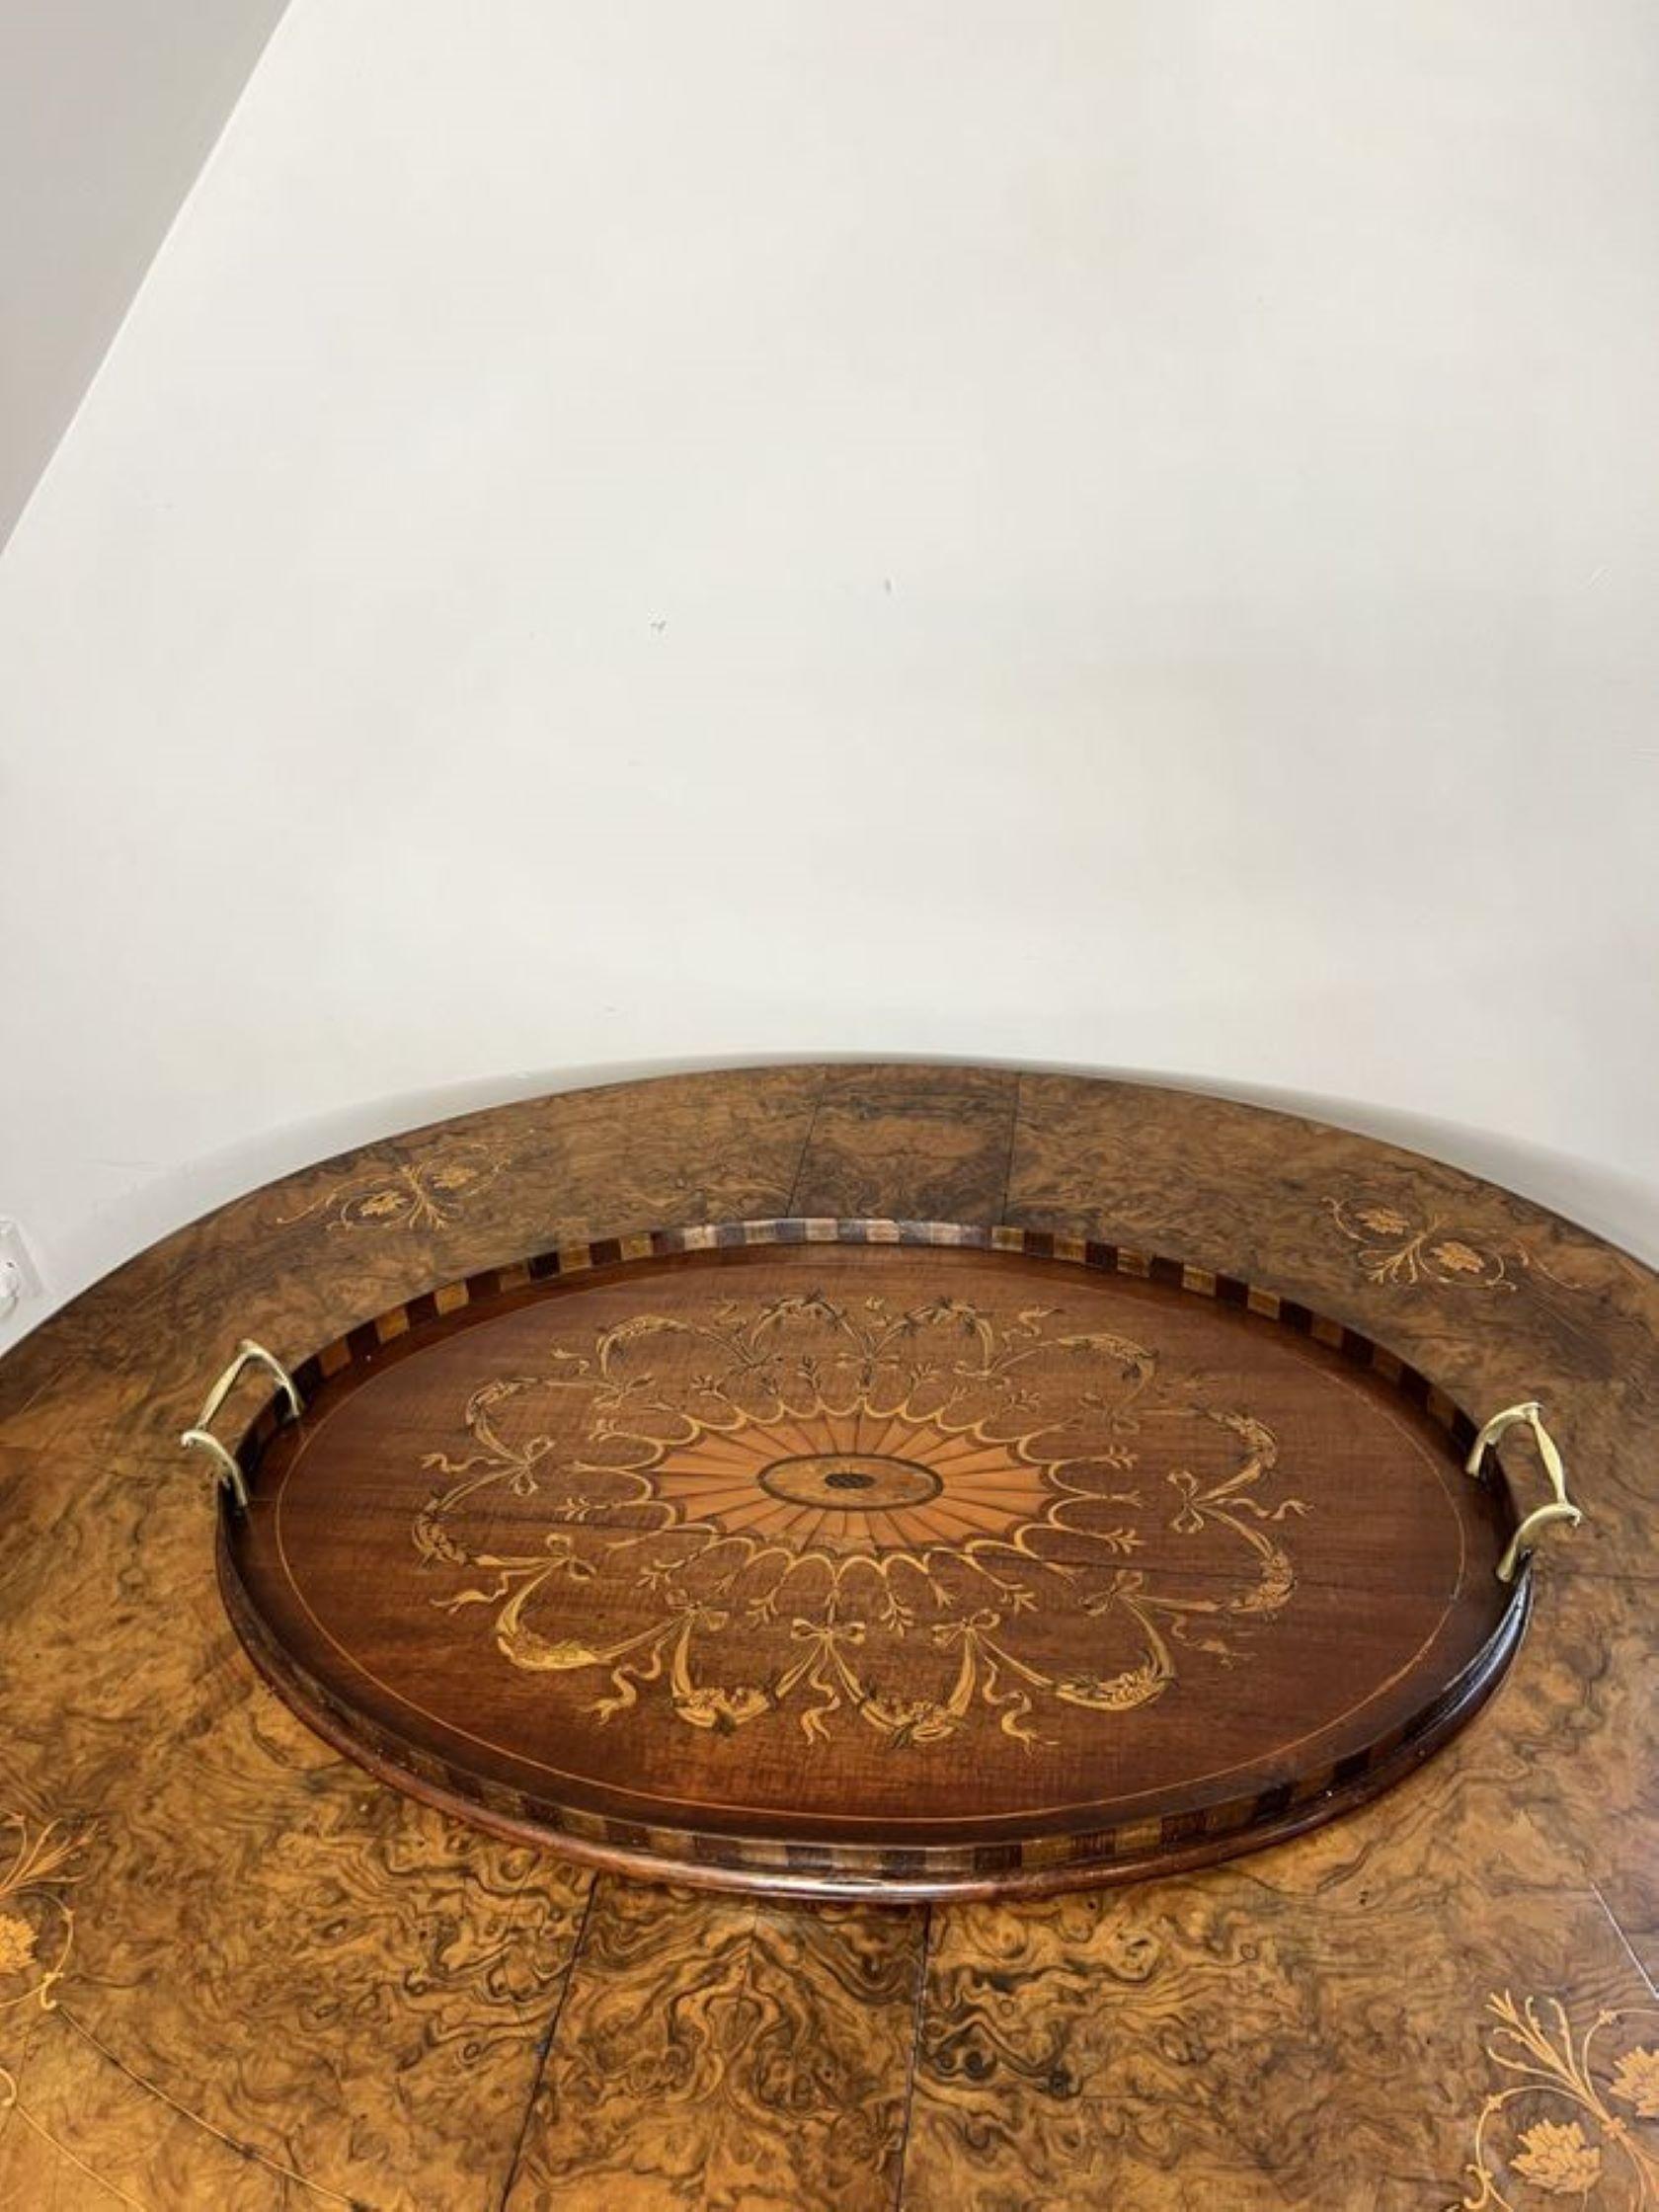 Stunning quality antique Victorian mahogany inlaid tea tray having a stunning antique mahogany inlaid tea tray, with fantastic inlay to the centre of the tray with bows, flowers and leaves, with a gallery edge and the original brass carrying handles